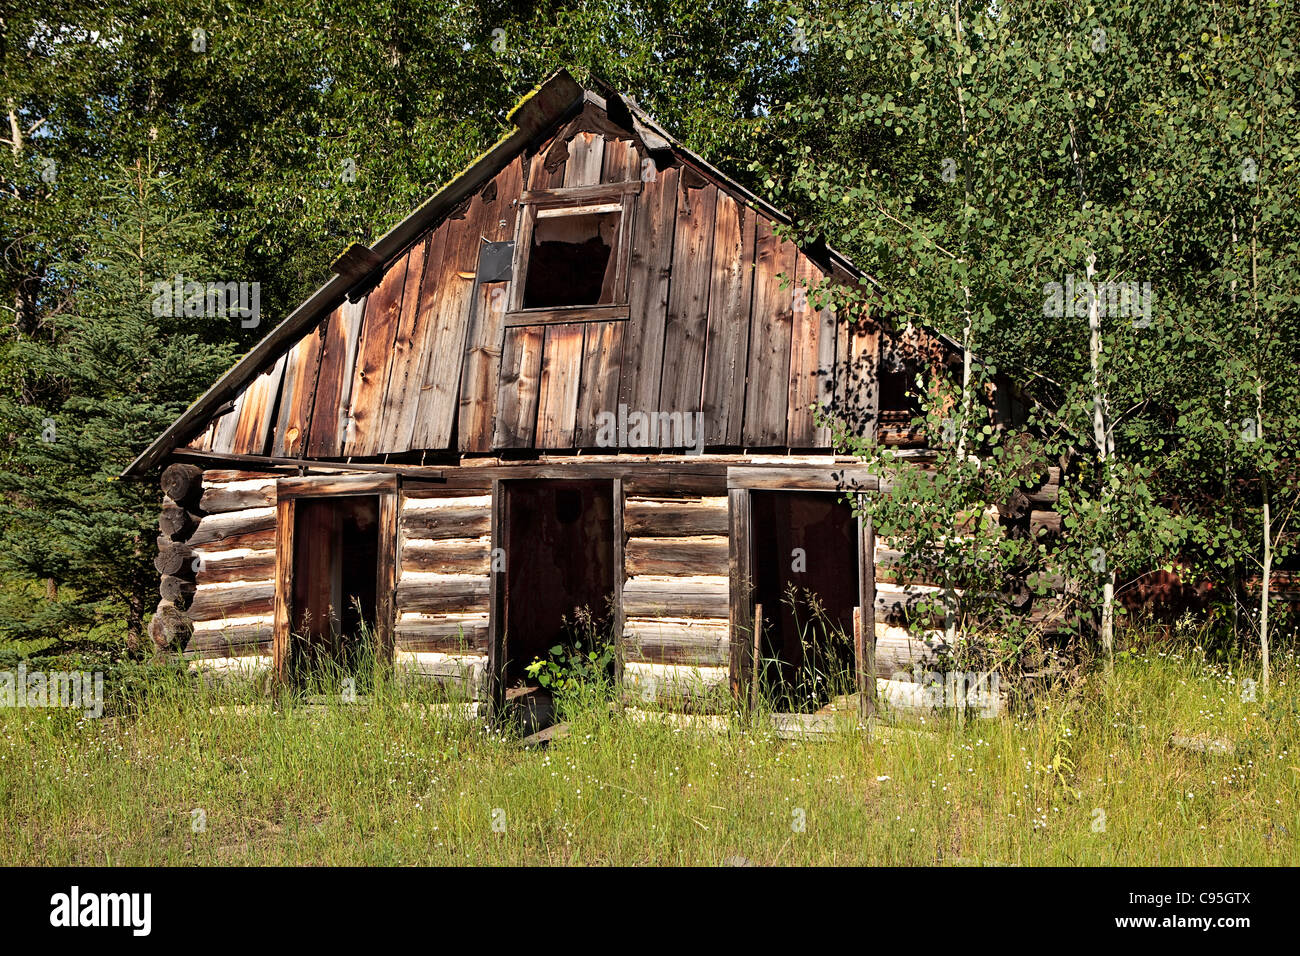 Image of a house in Bodie, Washington Stock Photo